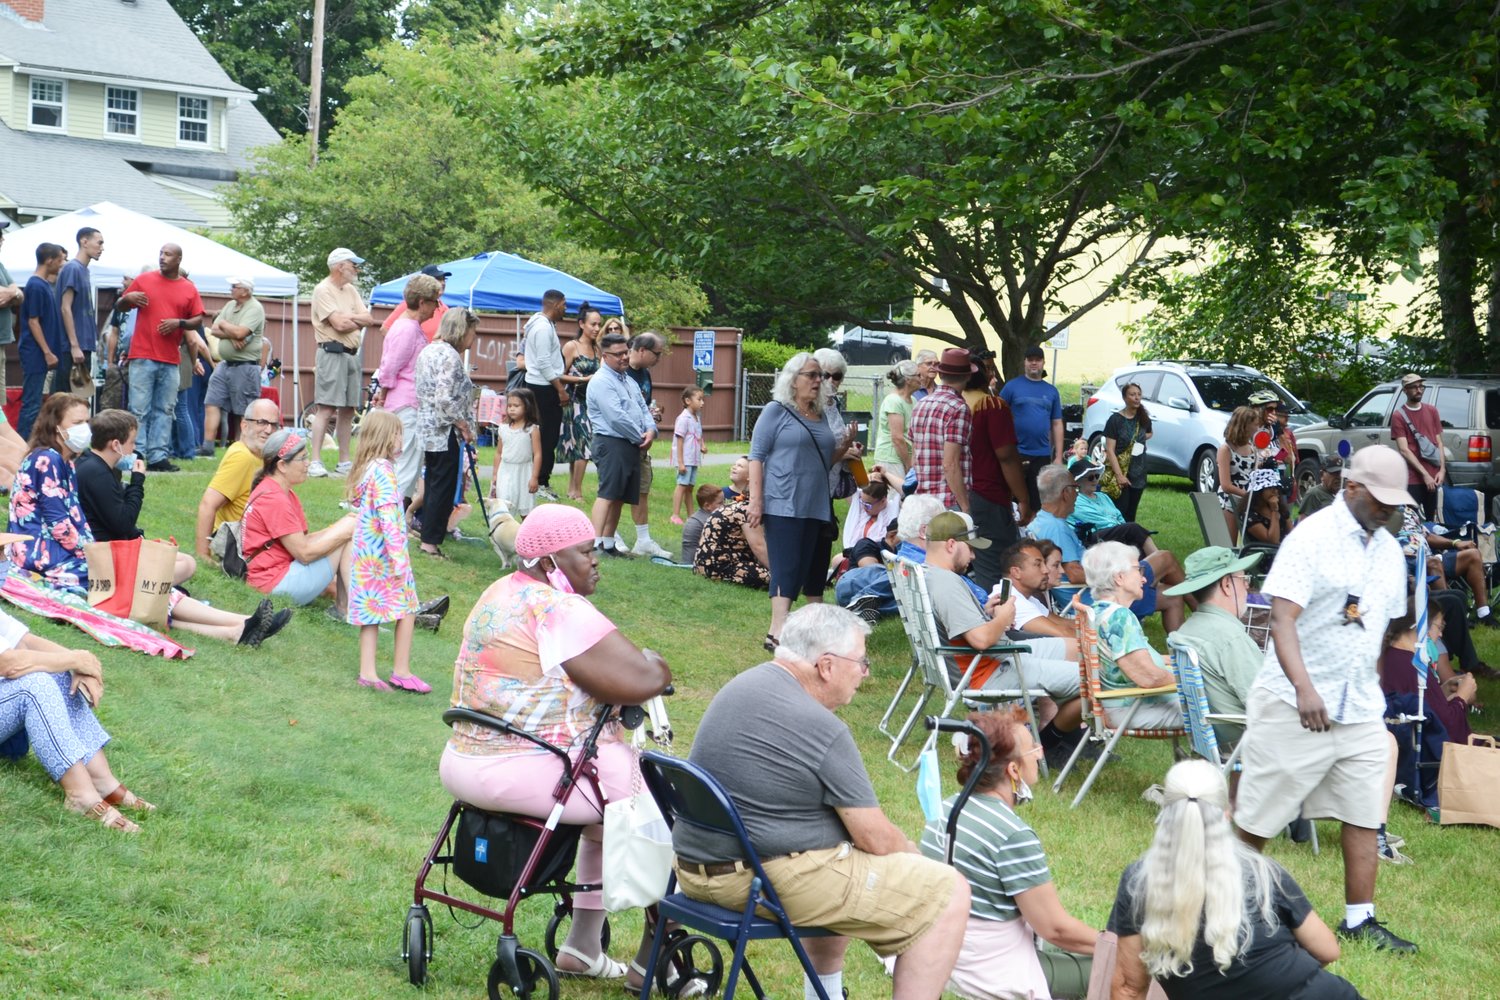 A crowd of 250 to 300 people gathered at Burr’s Hill in Warren to witness the Pokanoket Heritage Day ceremony.